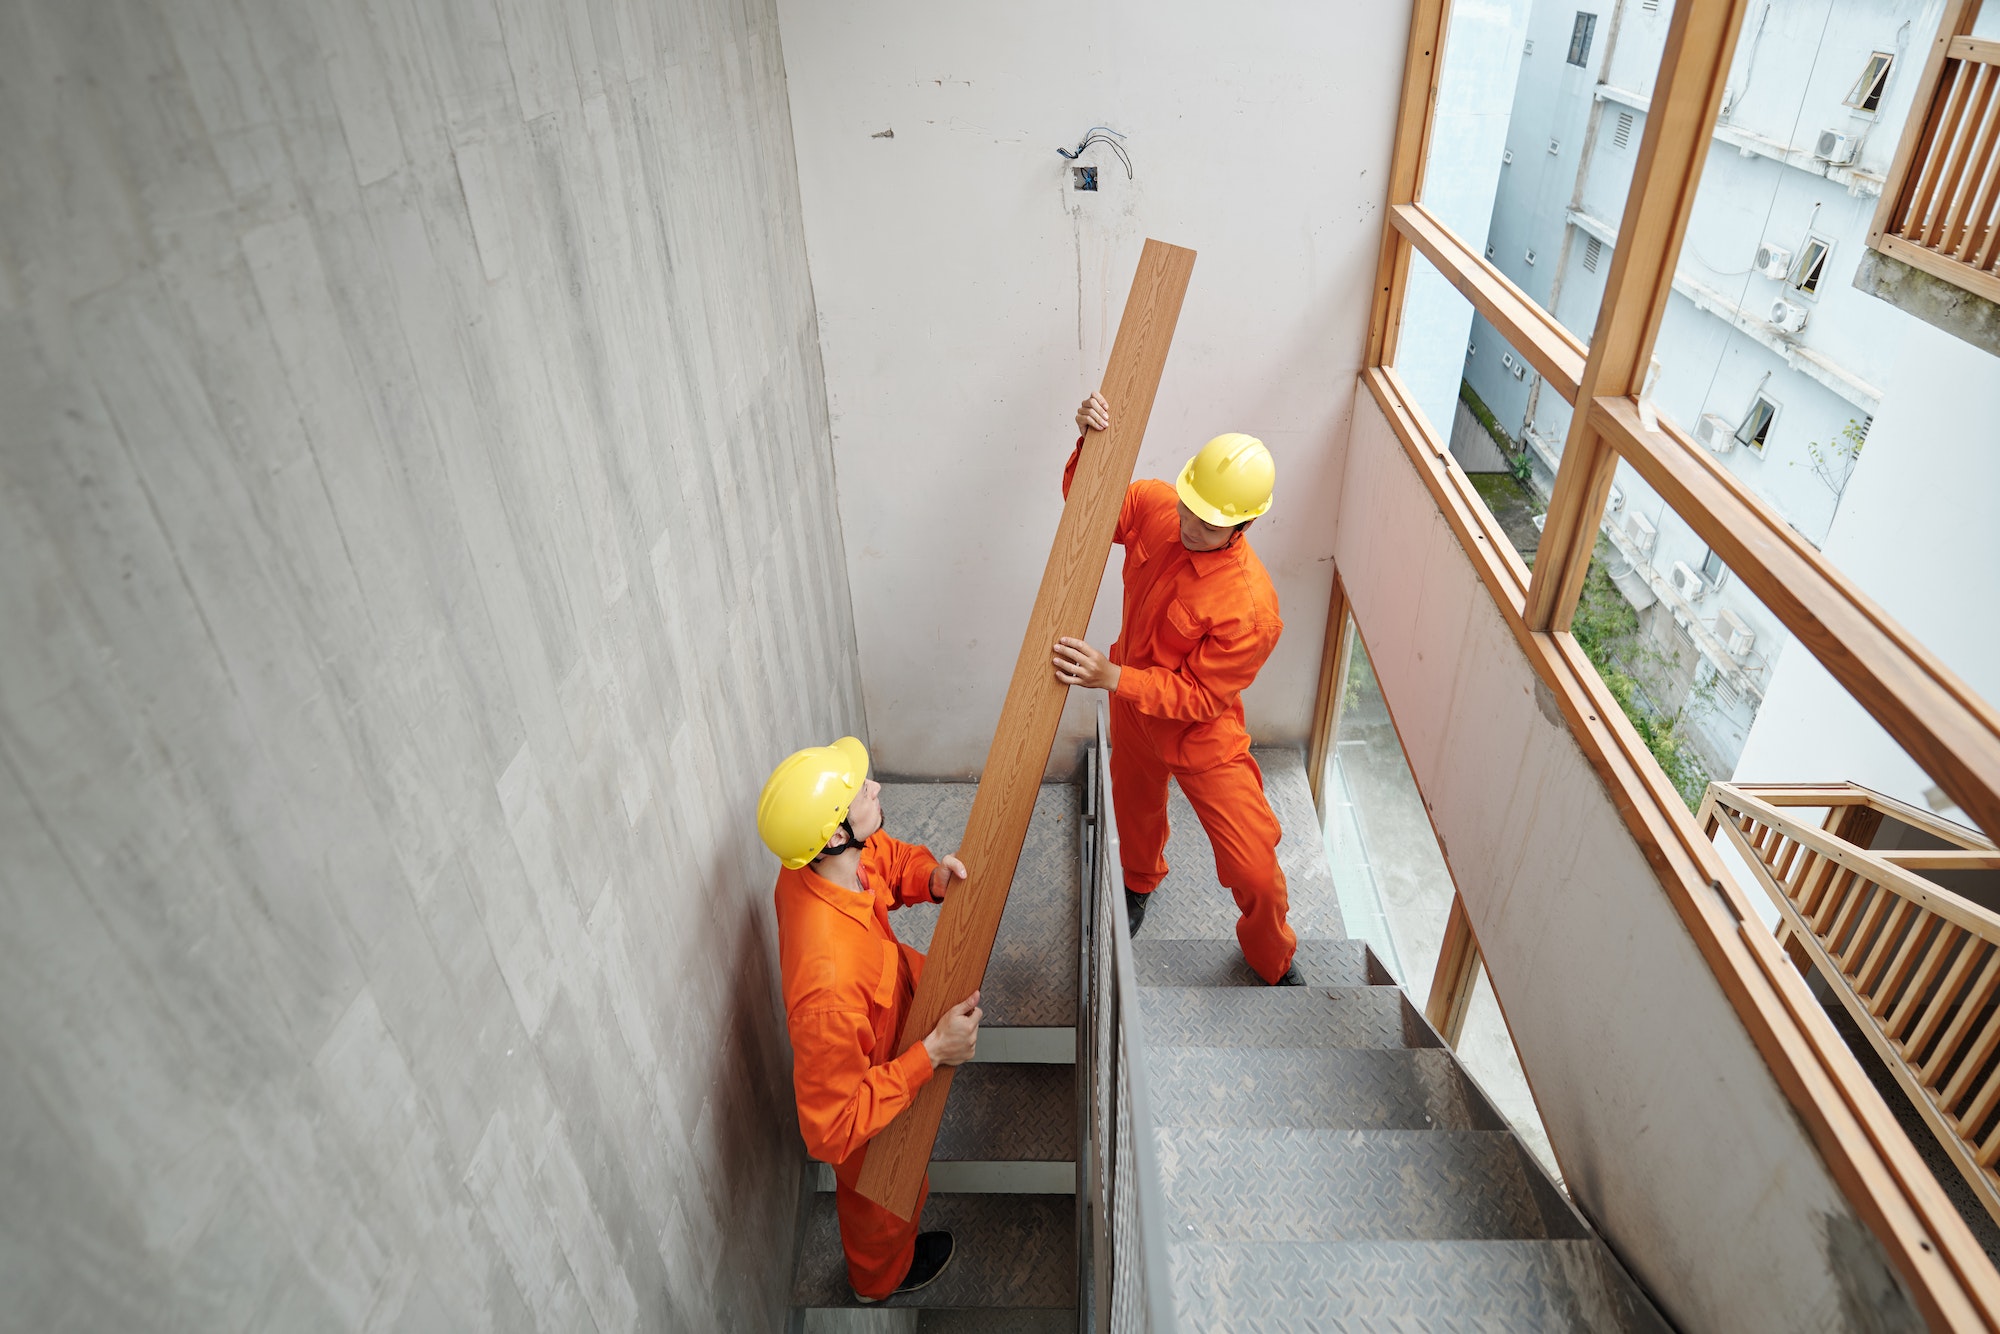 Workers Carrying Board up Narrow Stairs